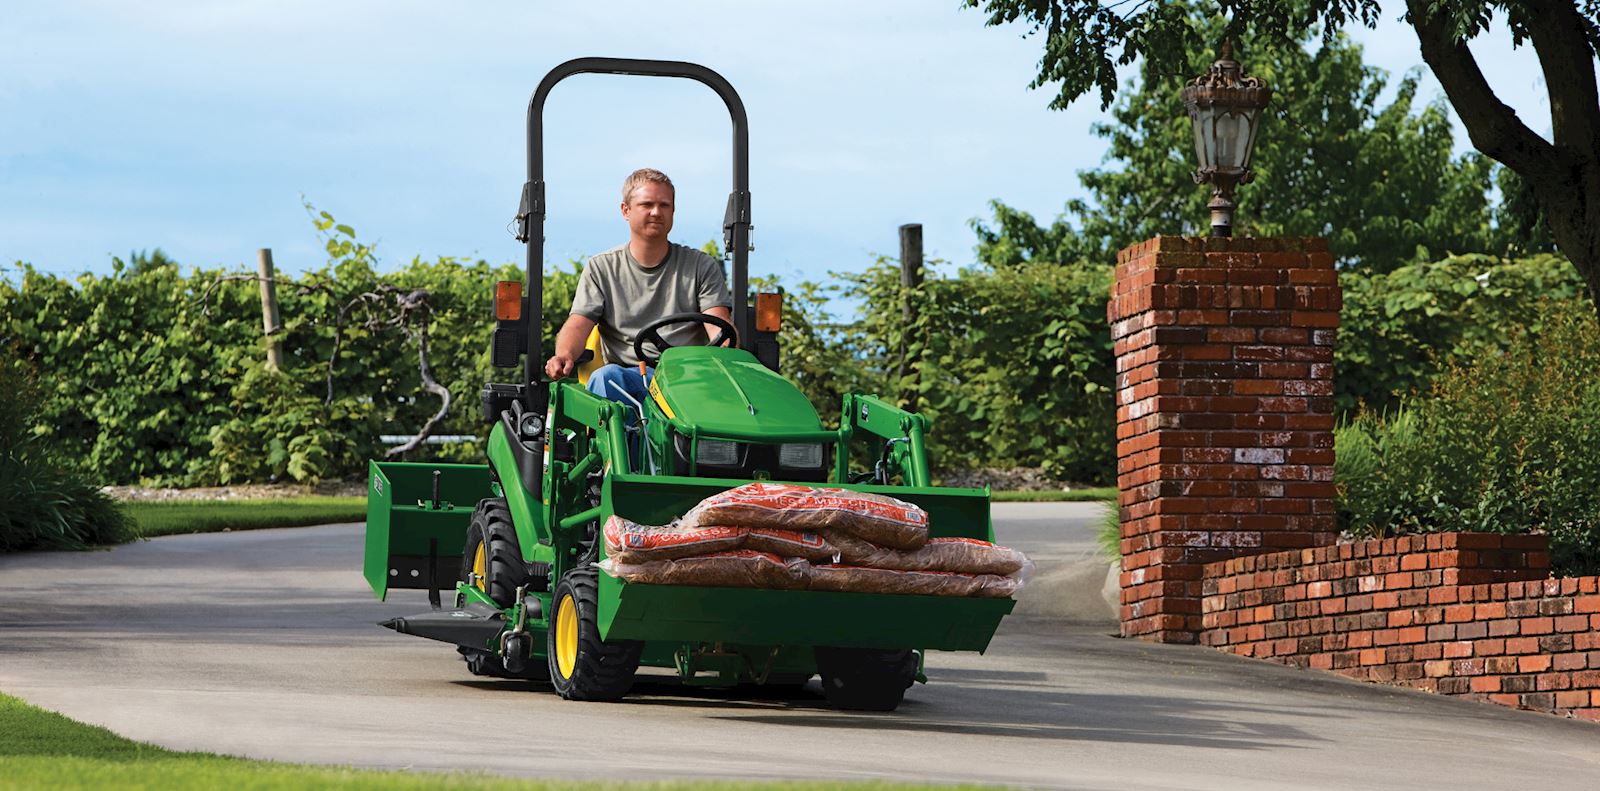 There is a wide array of available implements available for John Deere Compact Utility Tractors. Here is a look at some of the top attachments.